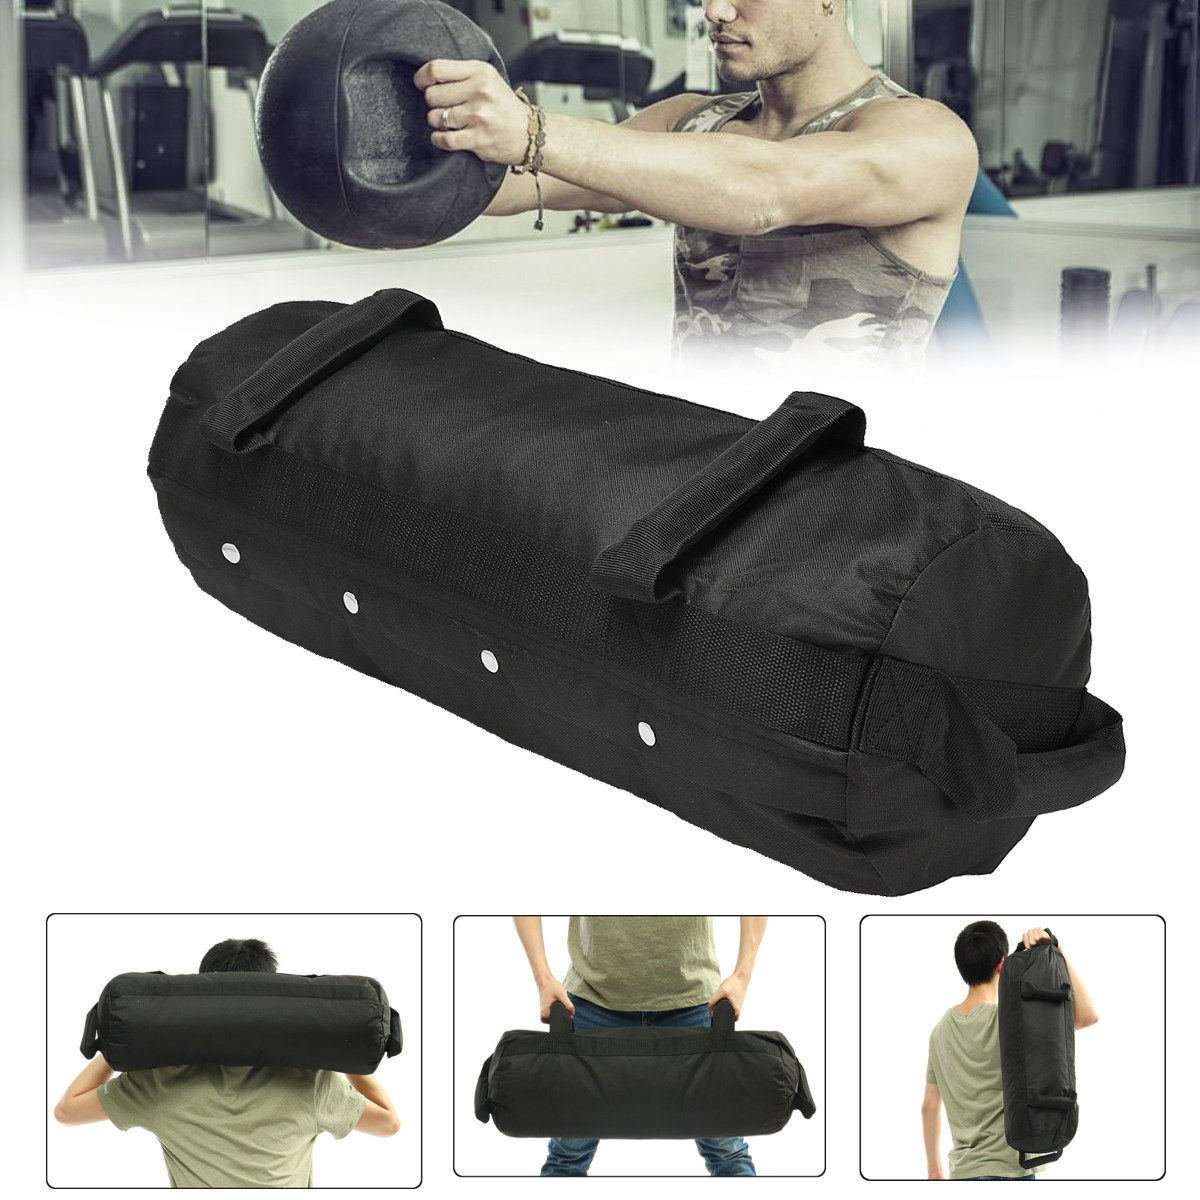 Adjustable Weightlifting Sandbag Fitness Muscle Training Weight Bag Exercise Tools